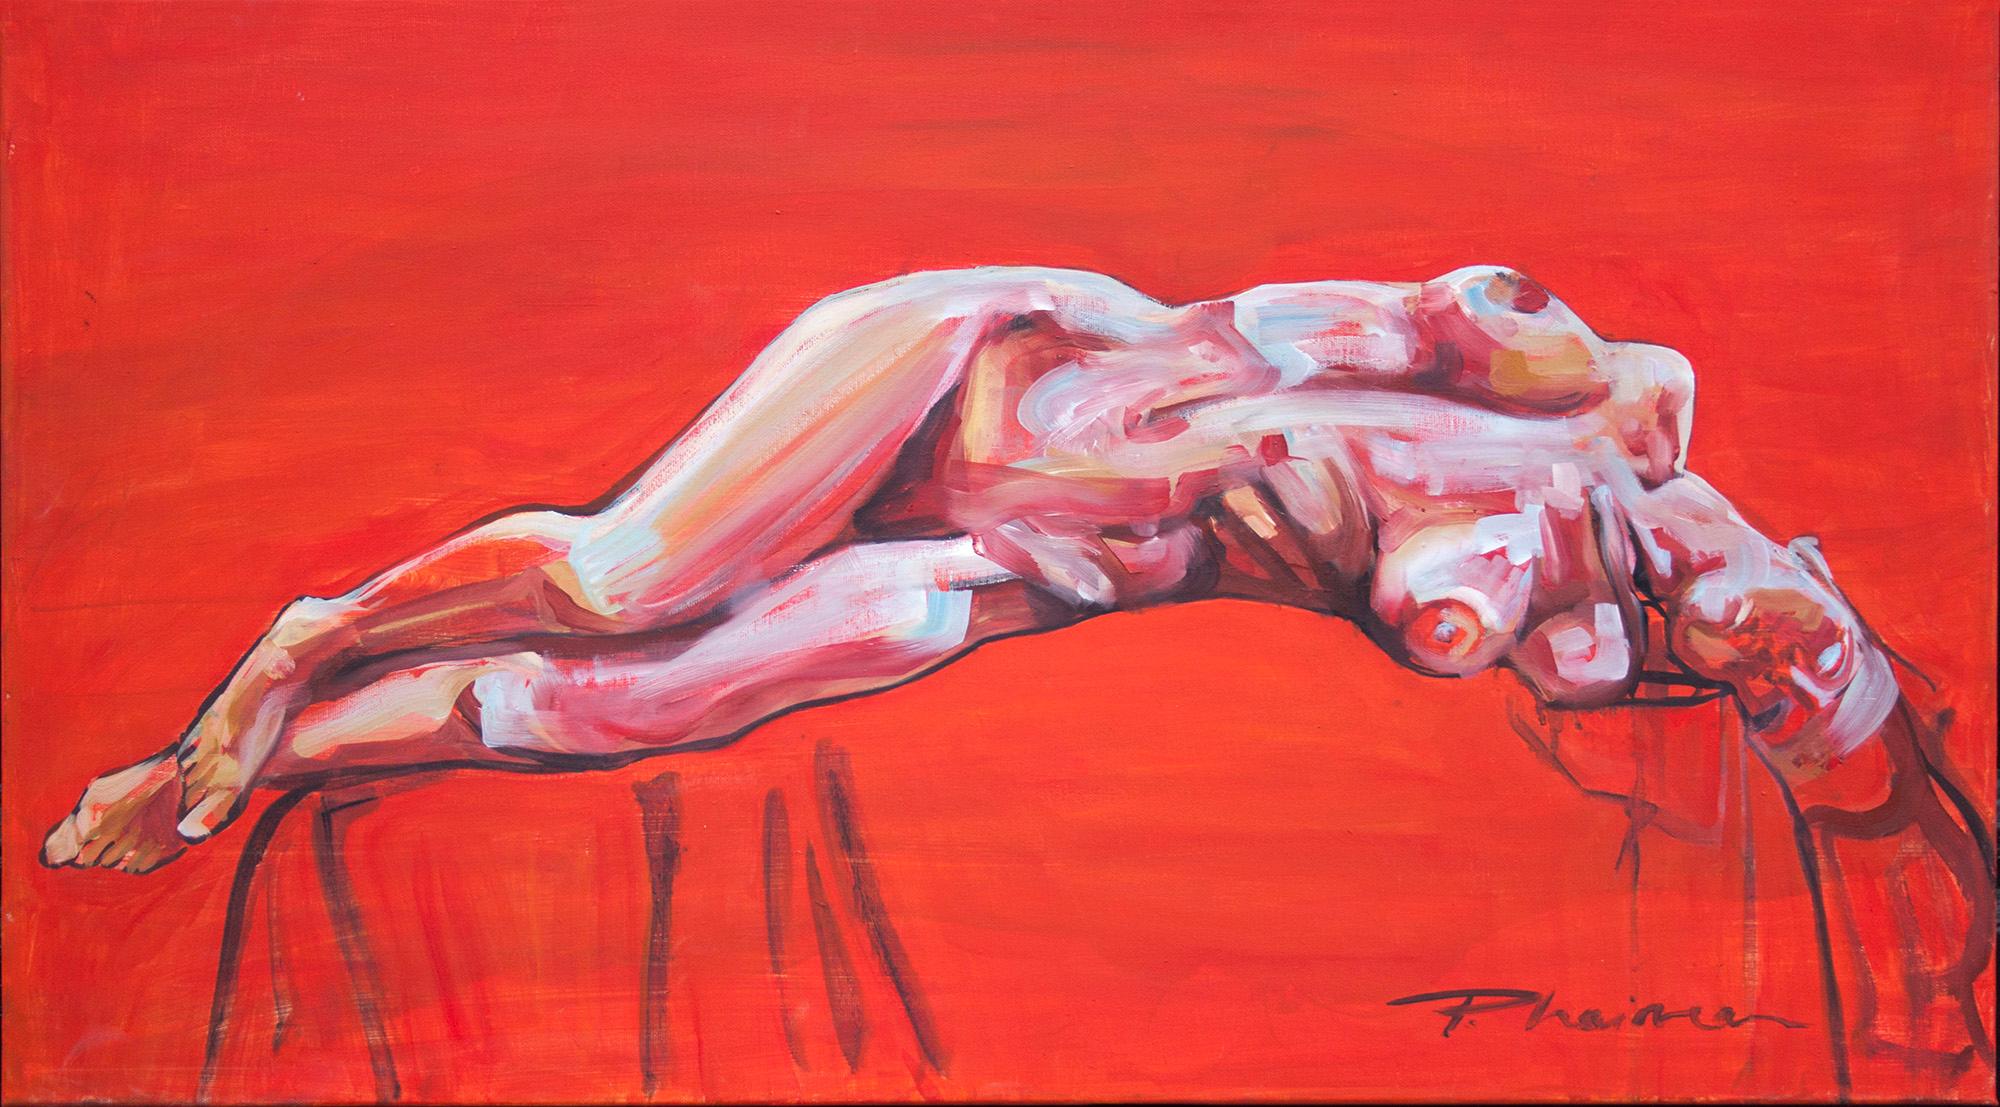 Red Nude
oil on canvas
Original, one-of-a-kind, painting.
FRAMED with gold minimalist frame

Part of "Nude in Interior" solo show, March 2022.


Artist Statement
"I started by painting interiors, being interested in space and perspective through my